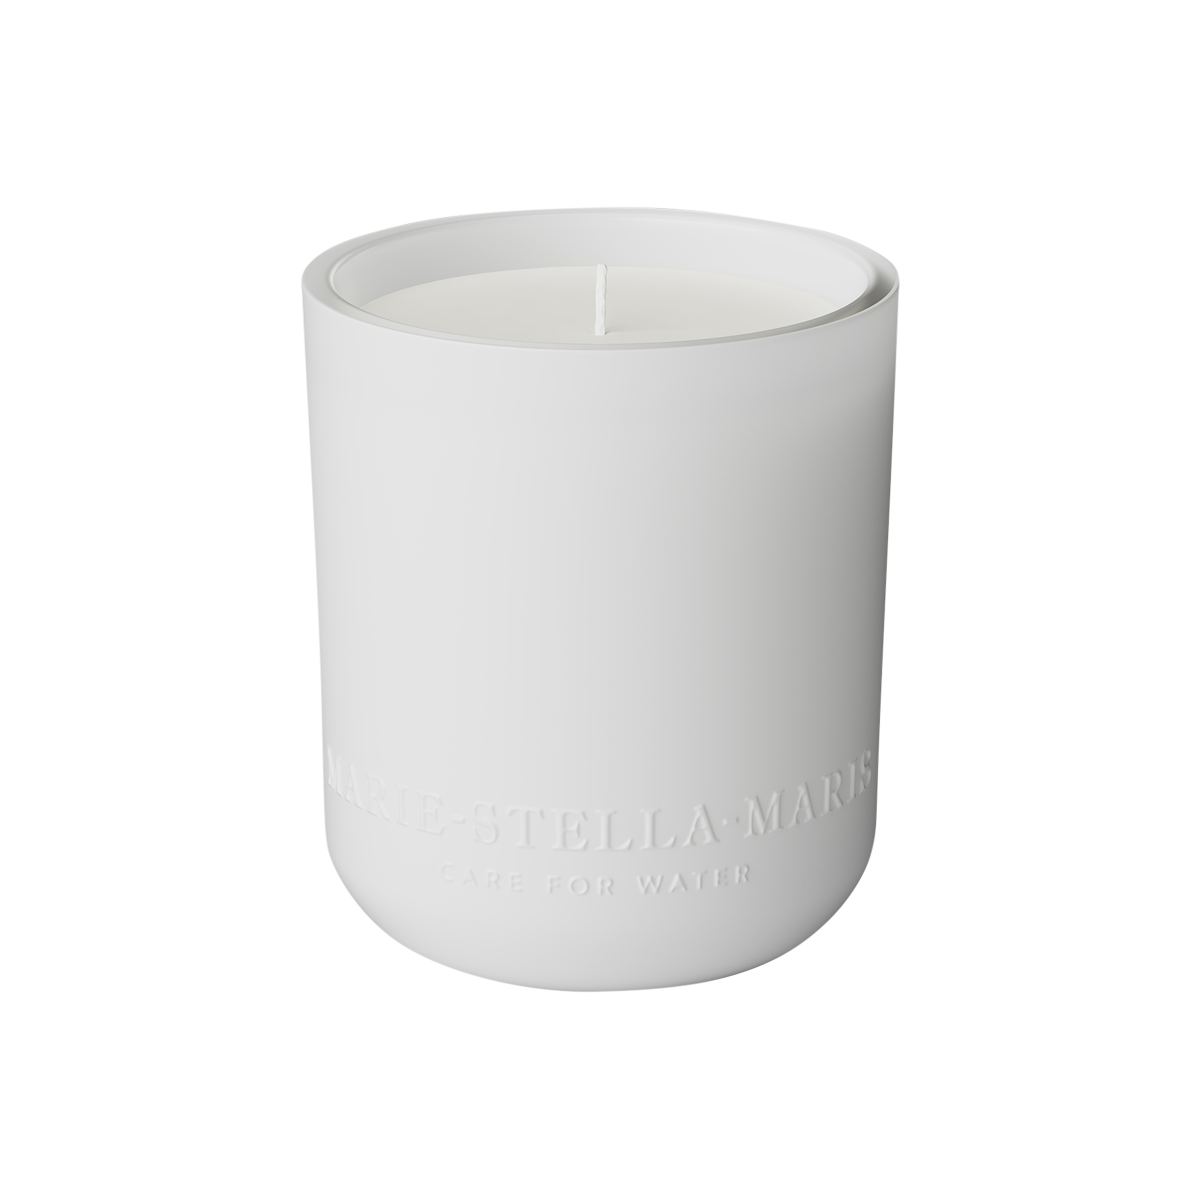 Marie-Stella-Maris - Objets d'Amsterdam Scented Candle